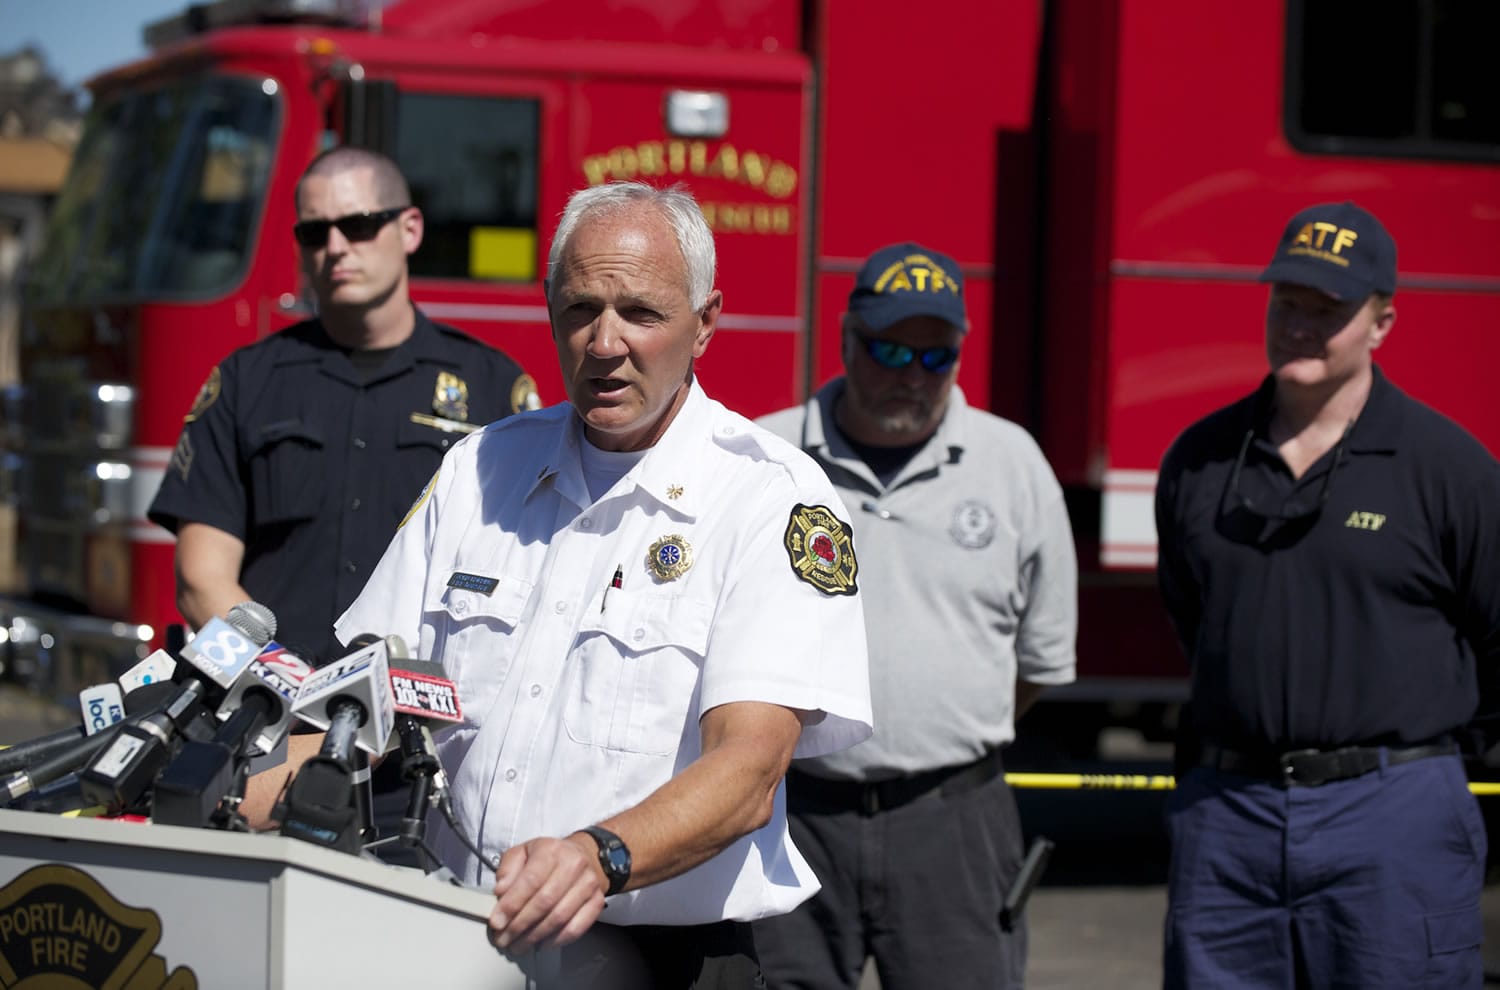 Fire Marshal John Harding addresses the media during a press conference about the investigation of the fire at the Thunderbird Hotel, Tuesday